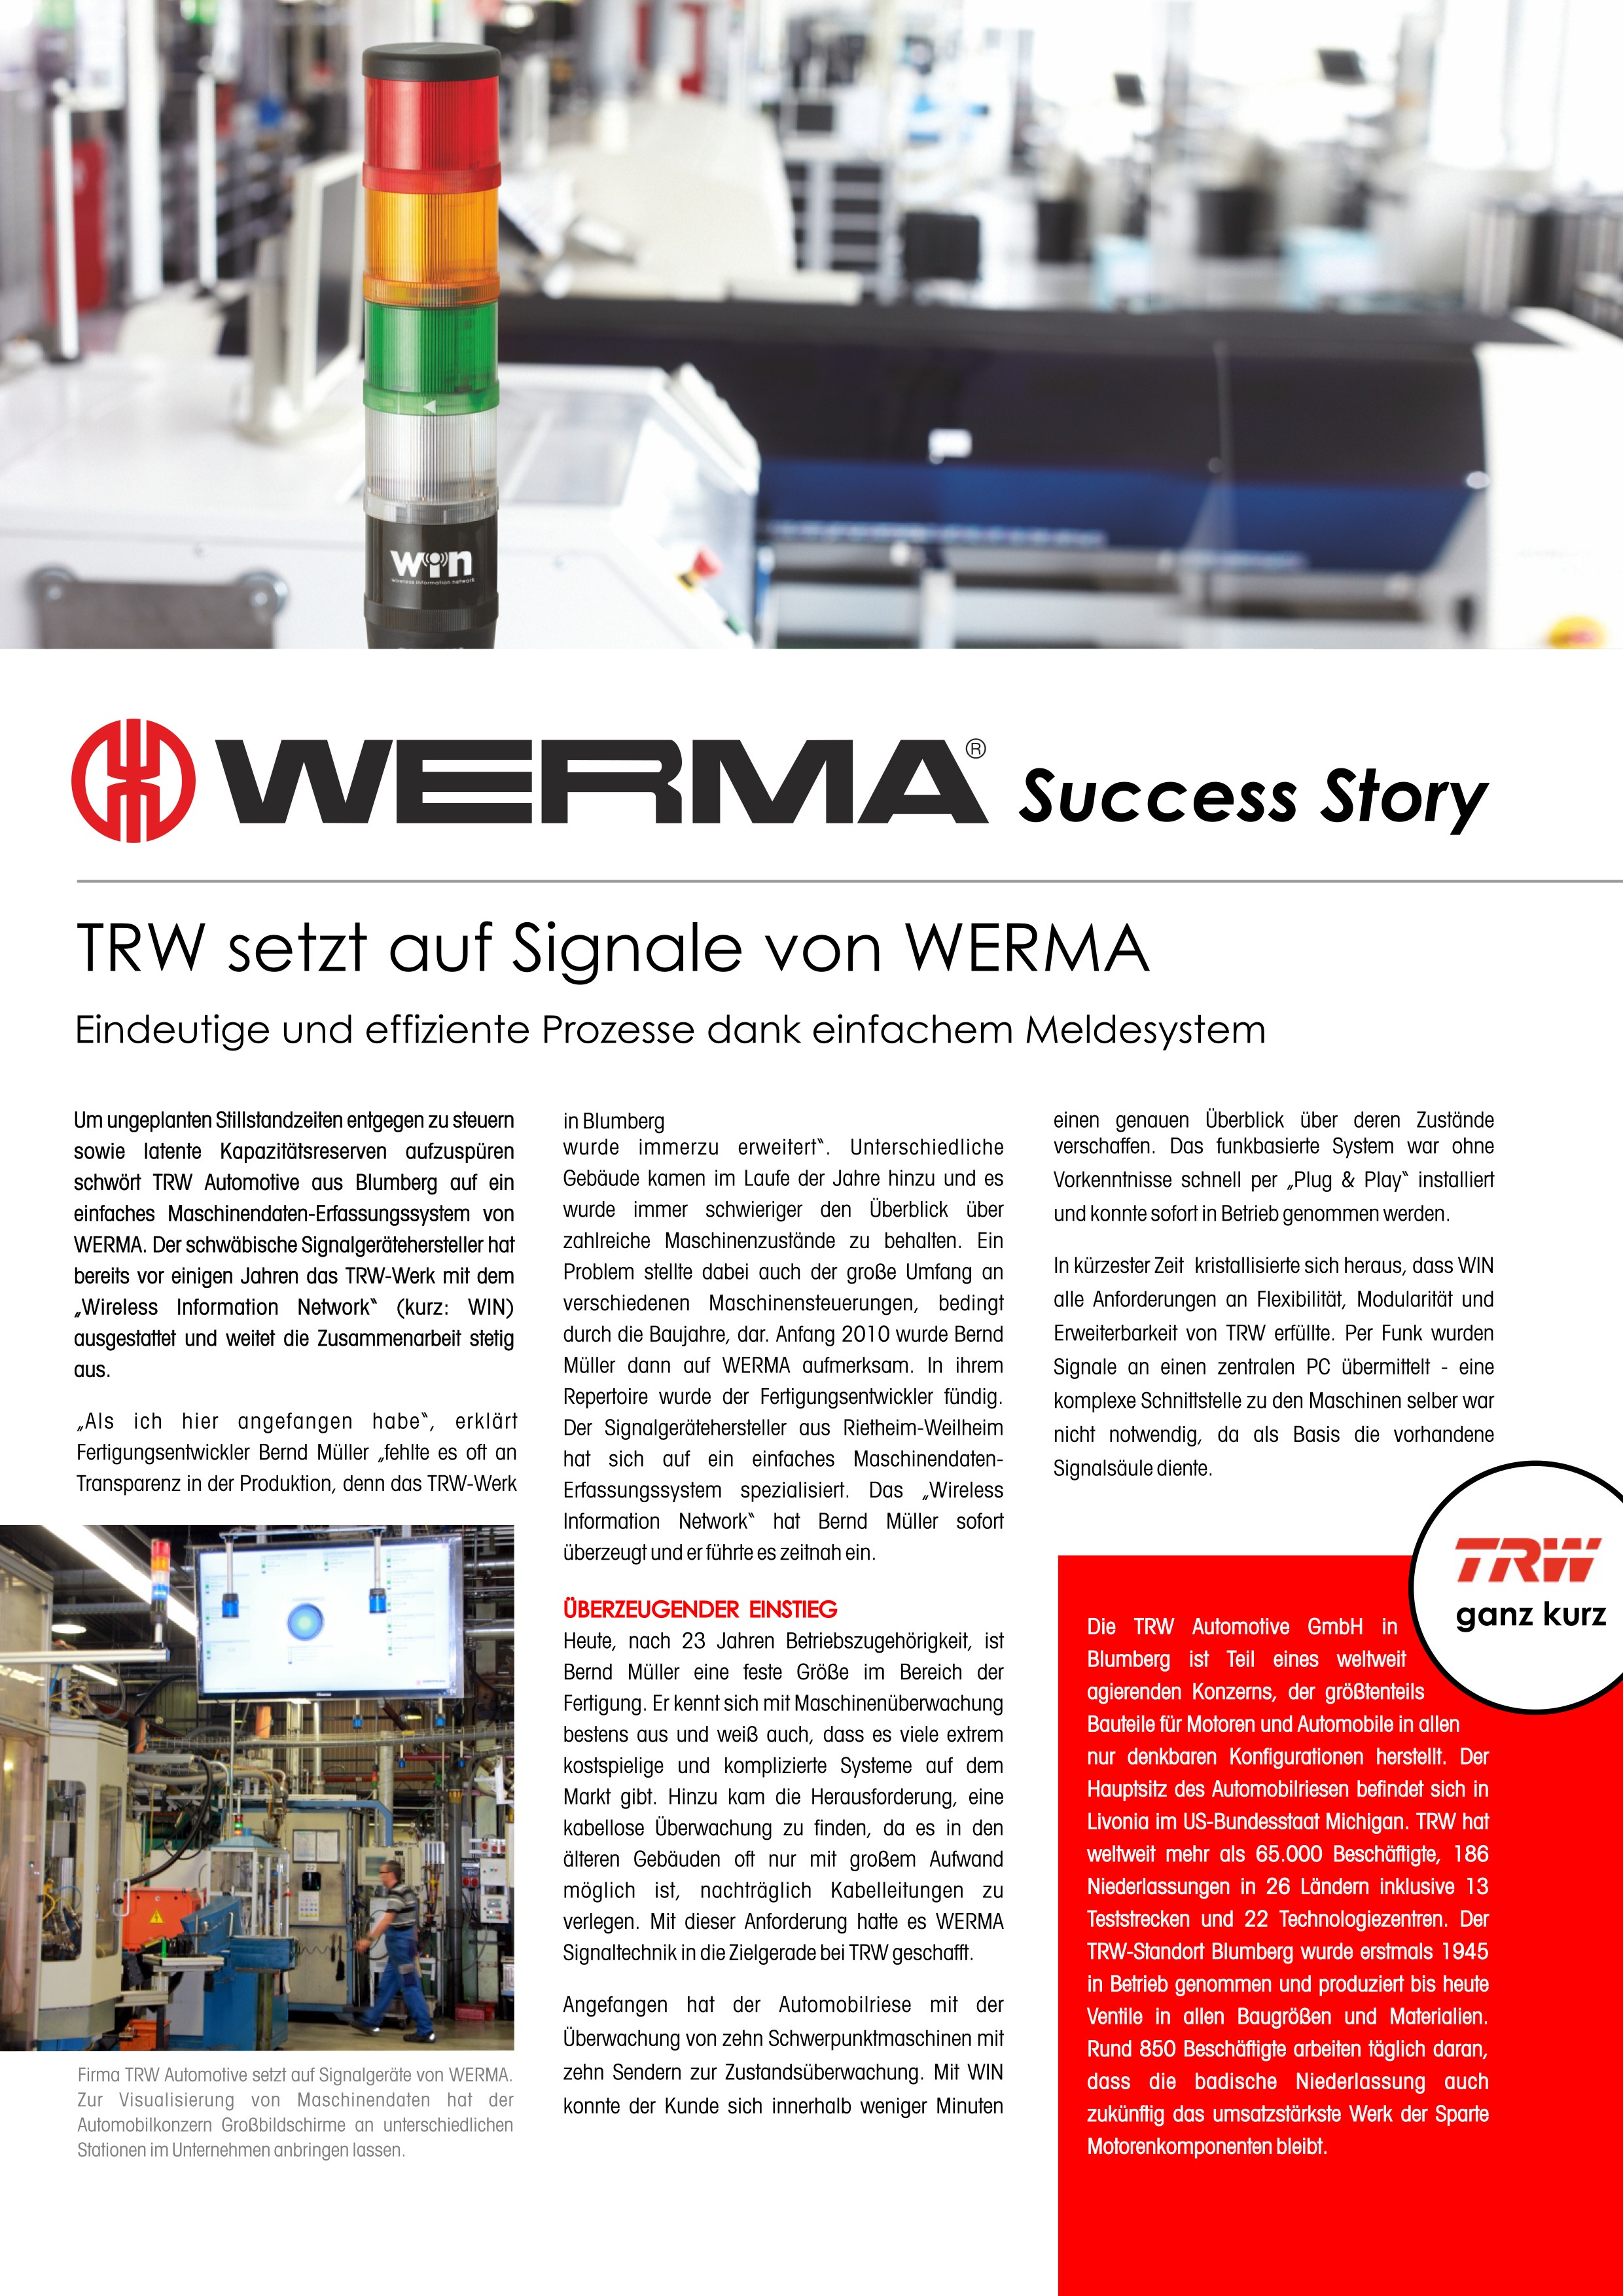 TRW - TRW calls for action with the help of WERMA